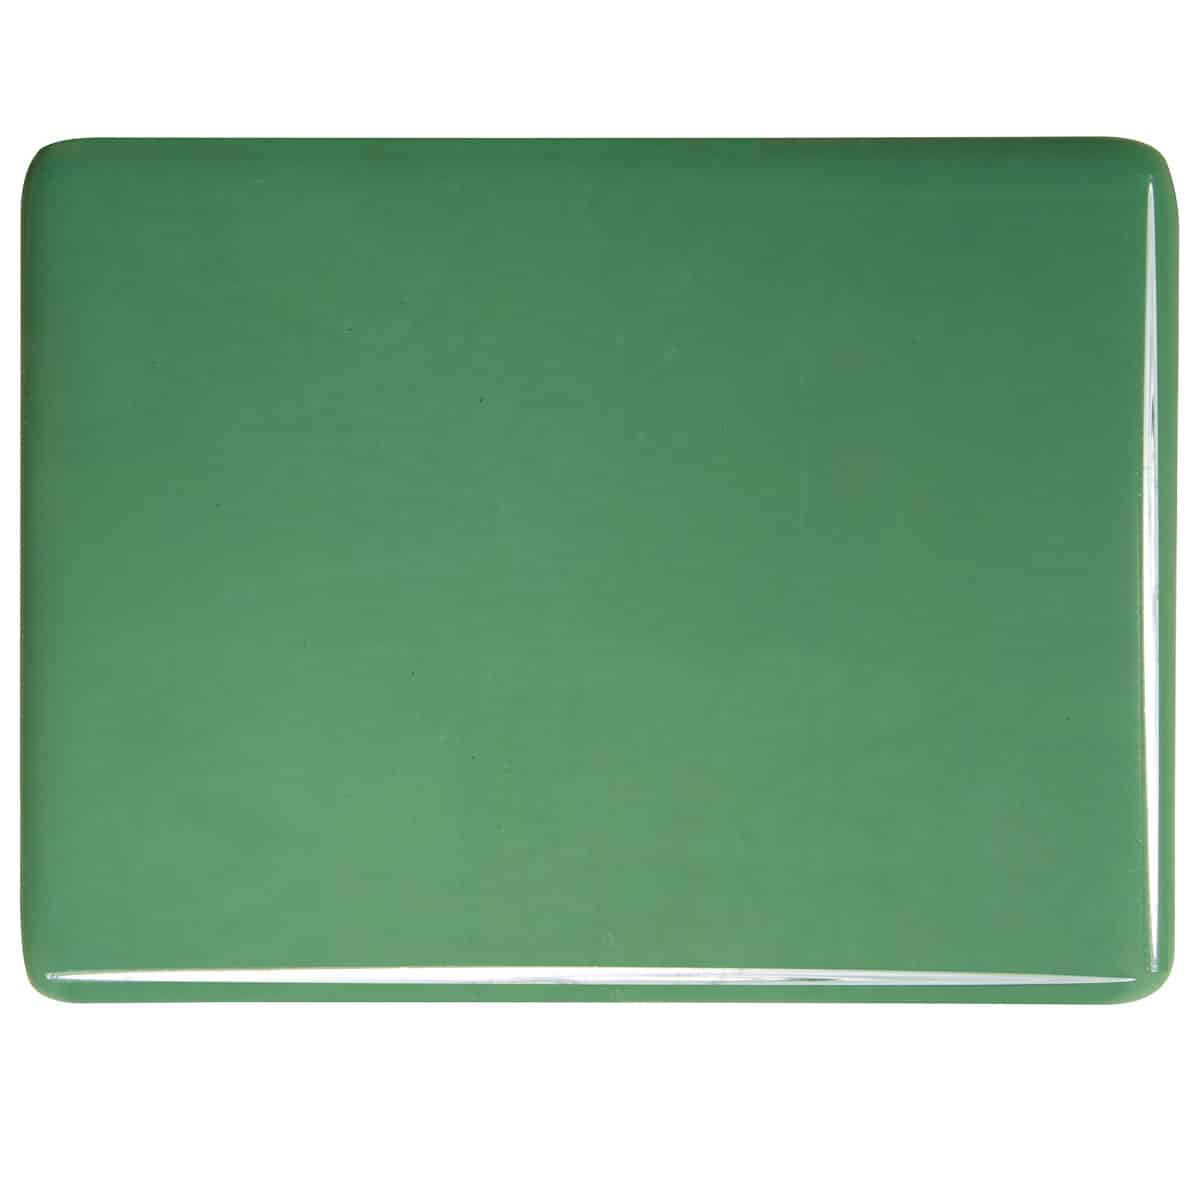 000117 Mineral Green Opalescent